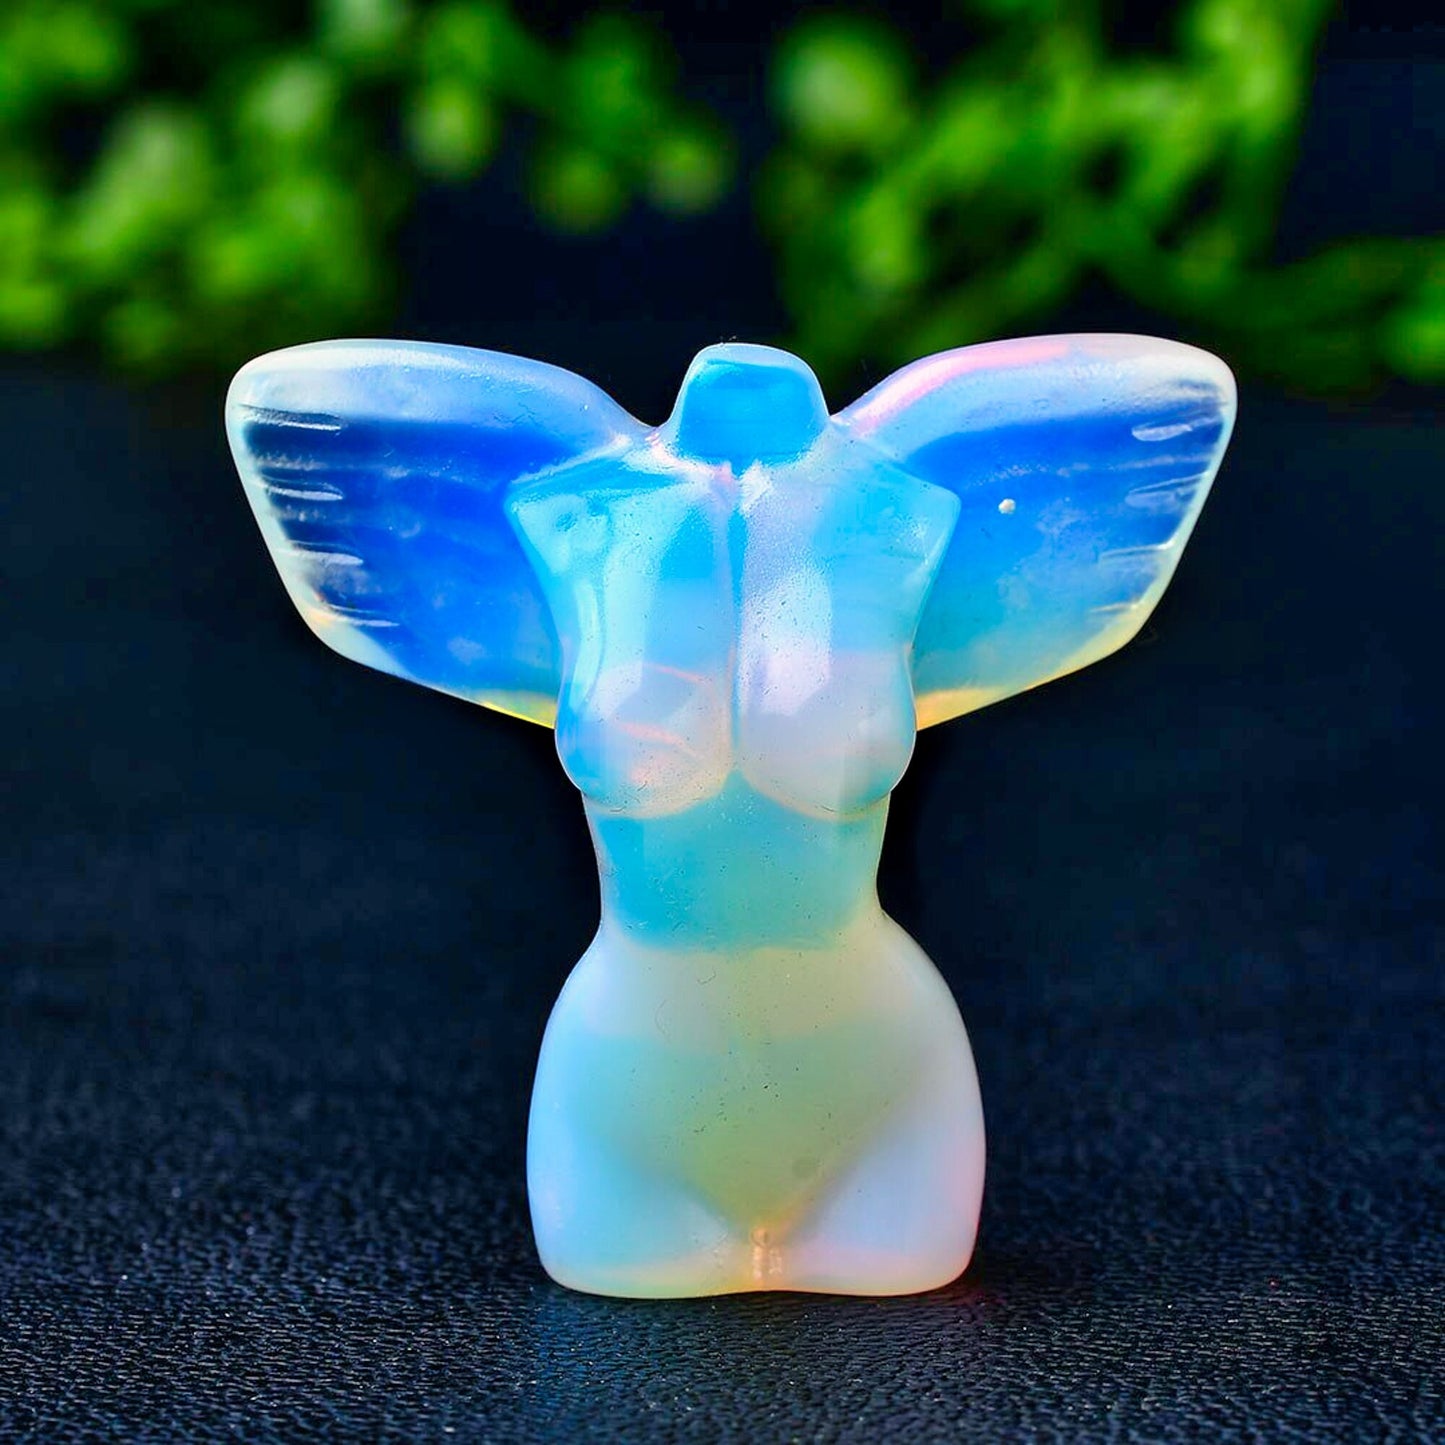 Natural Crystal Wing Model Statue Handmade Opal Female Body Carved Crafts Figurine - Home Ornament Gift